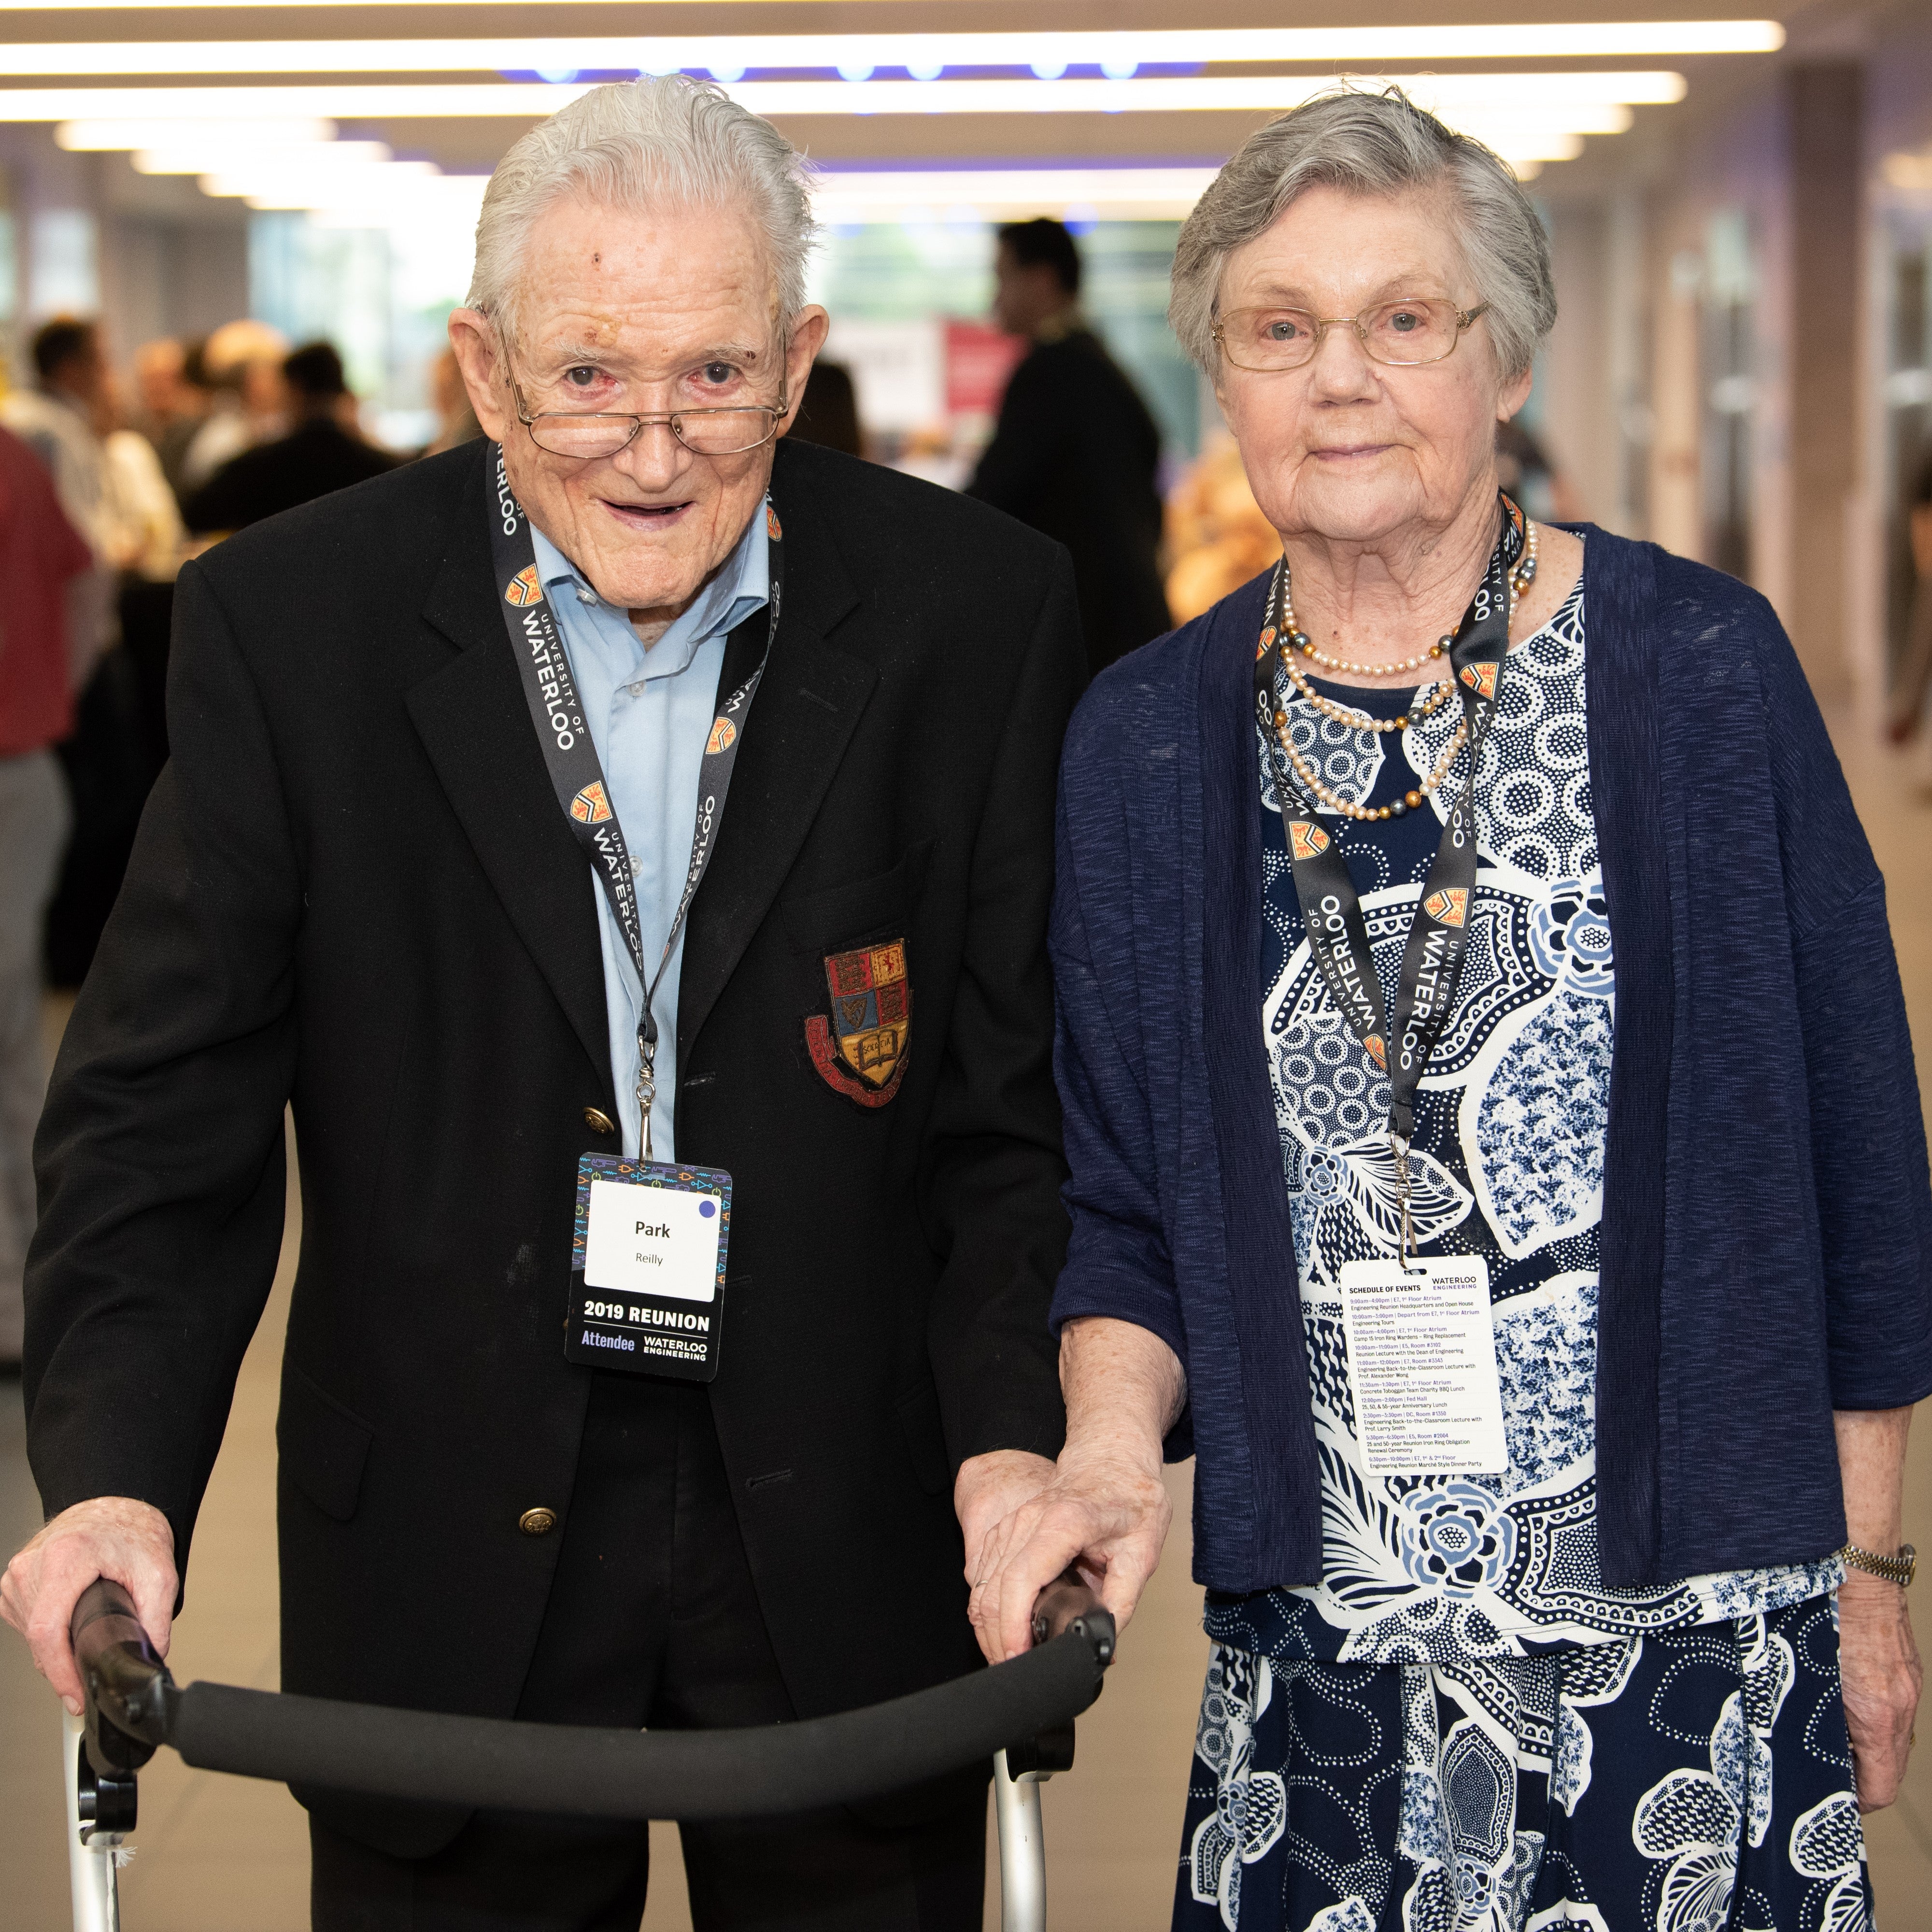 Park and Veva Reilly attend 2019 engineering reunion